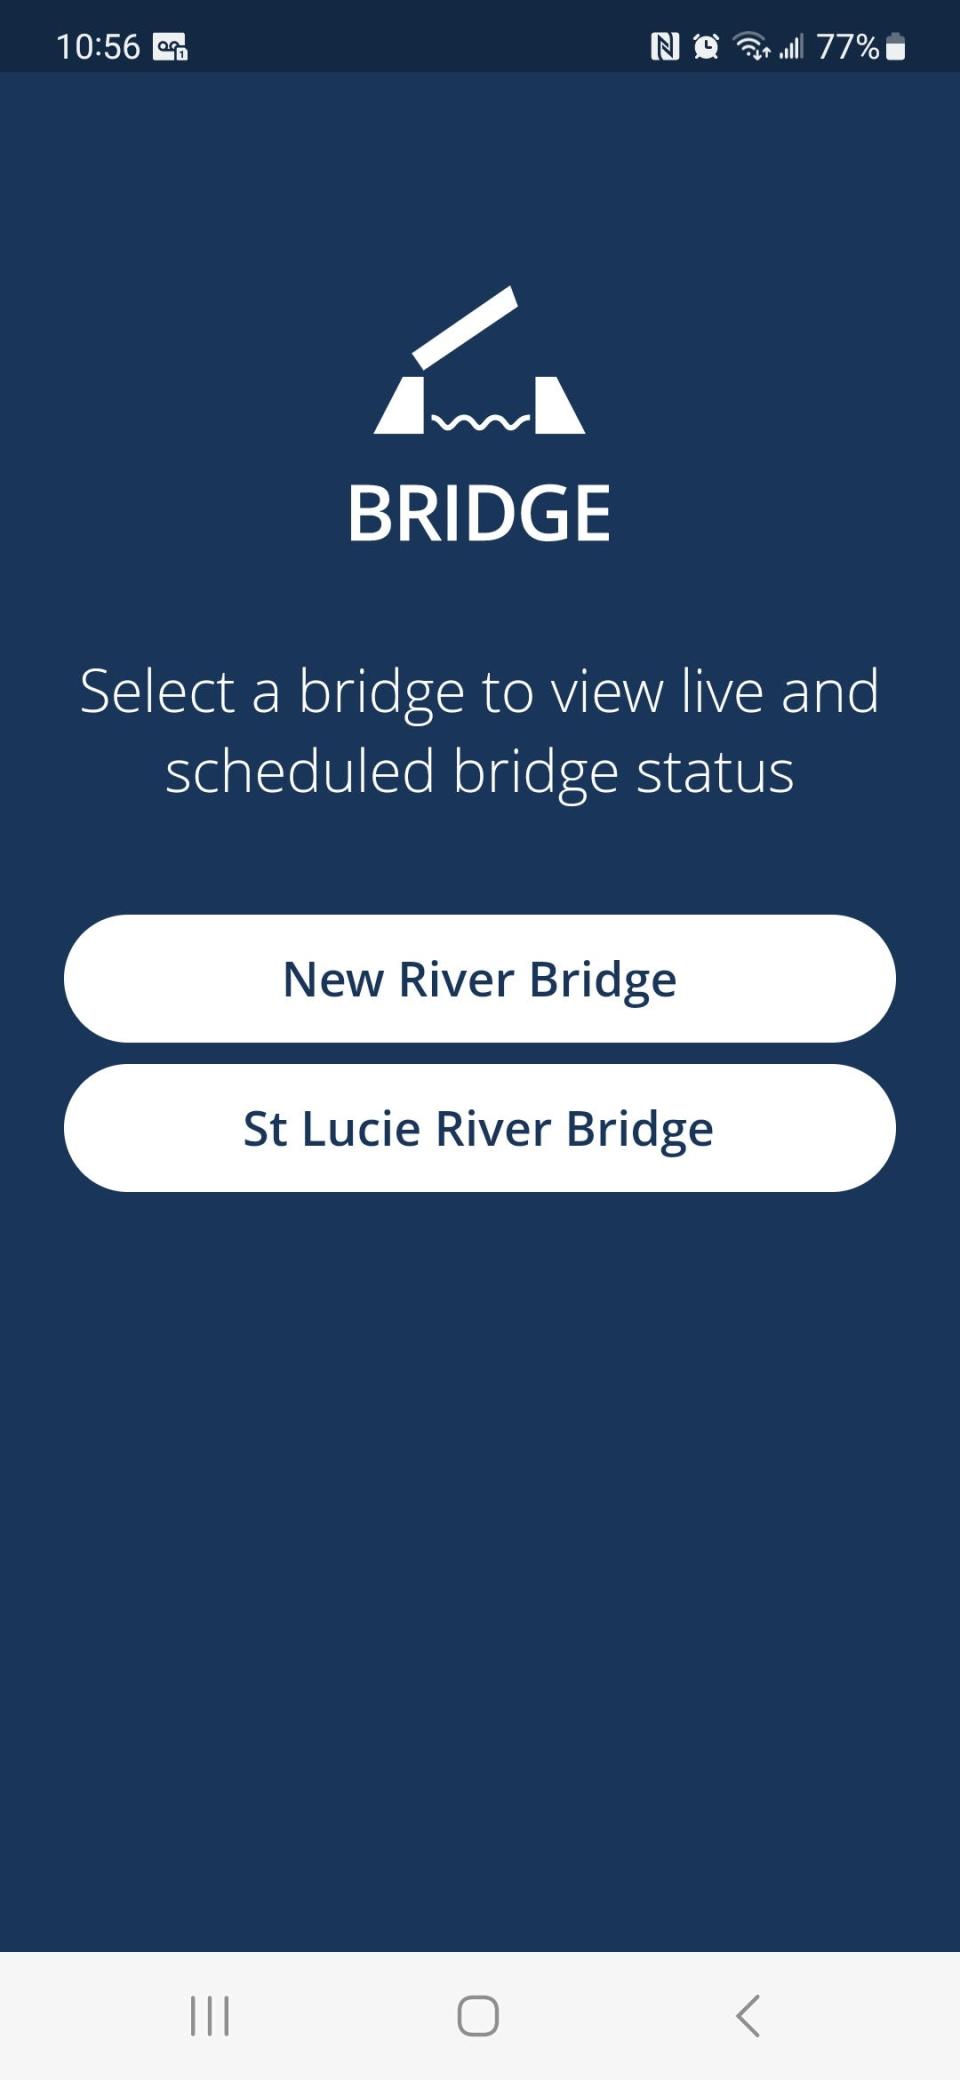 This is a screenshot of the app created by Brightline and FEC Railway that lists status and schedule of the Stuart railroad bridge and New river railroad bridge in Fort Lauderdale.